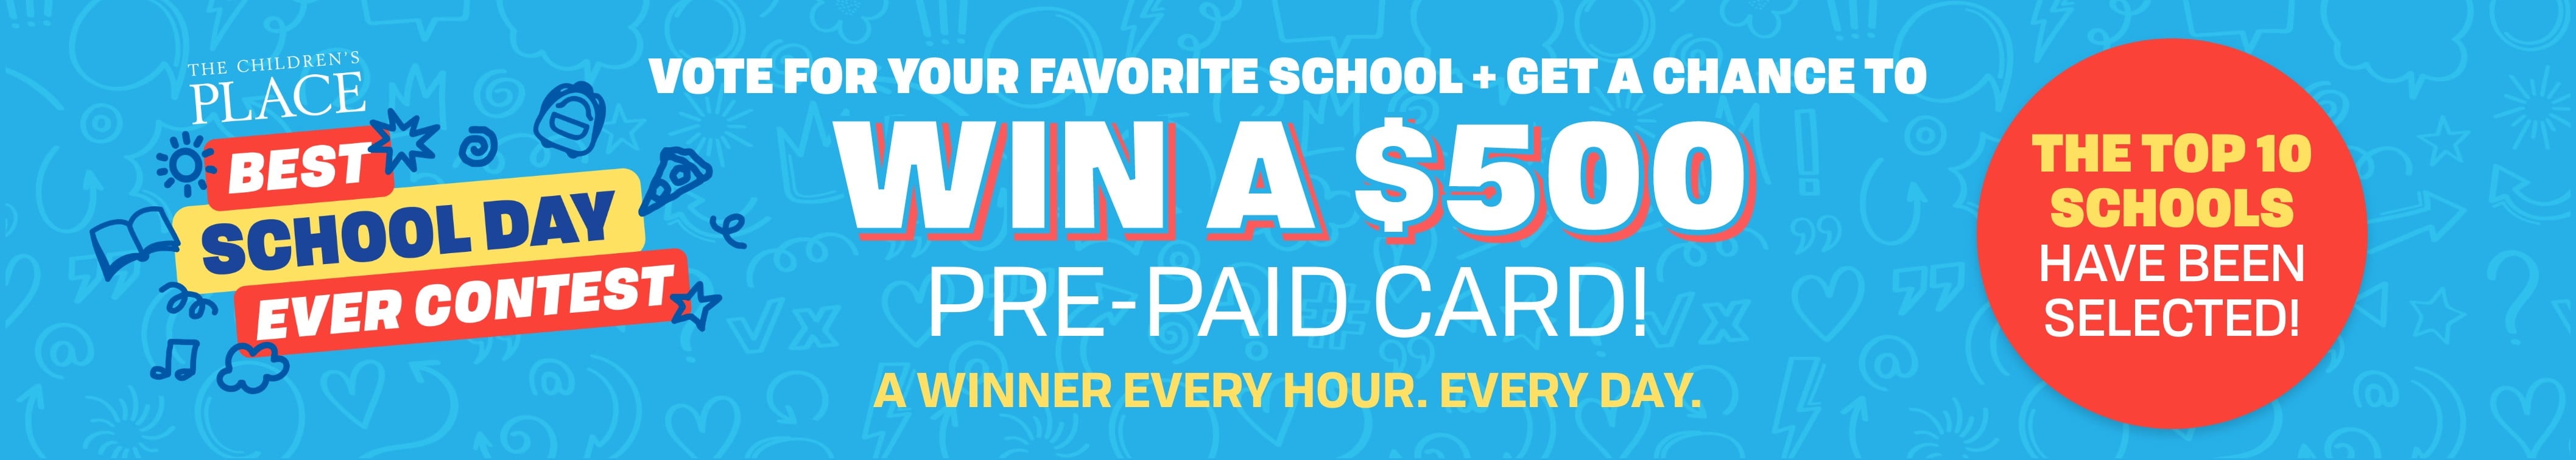 BEST SCHOOL DAY EVER CONTEST. VOTE FOR YOUR FAVORITE SCHOOL + GET A CHANCE TO WIN A $500 PRE PAID CARD! A WINNER EVERY HOUR.